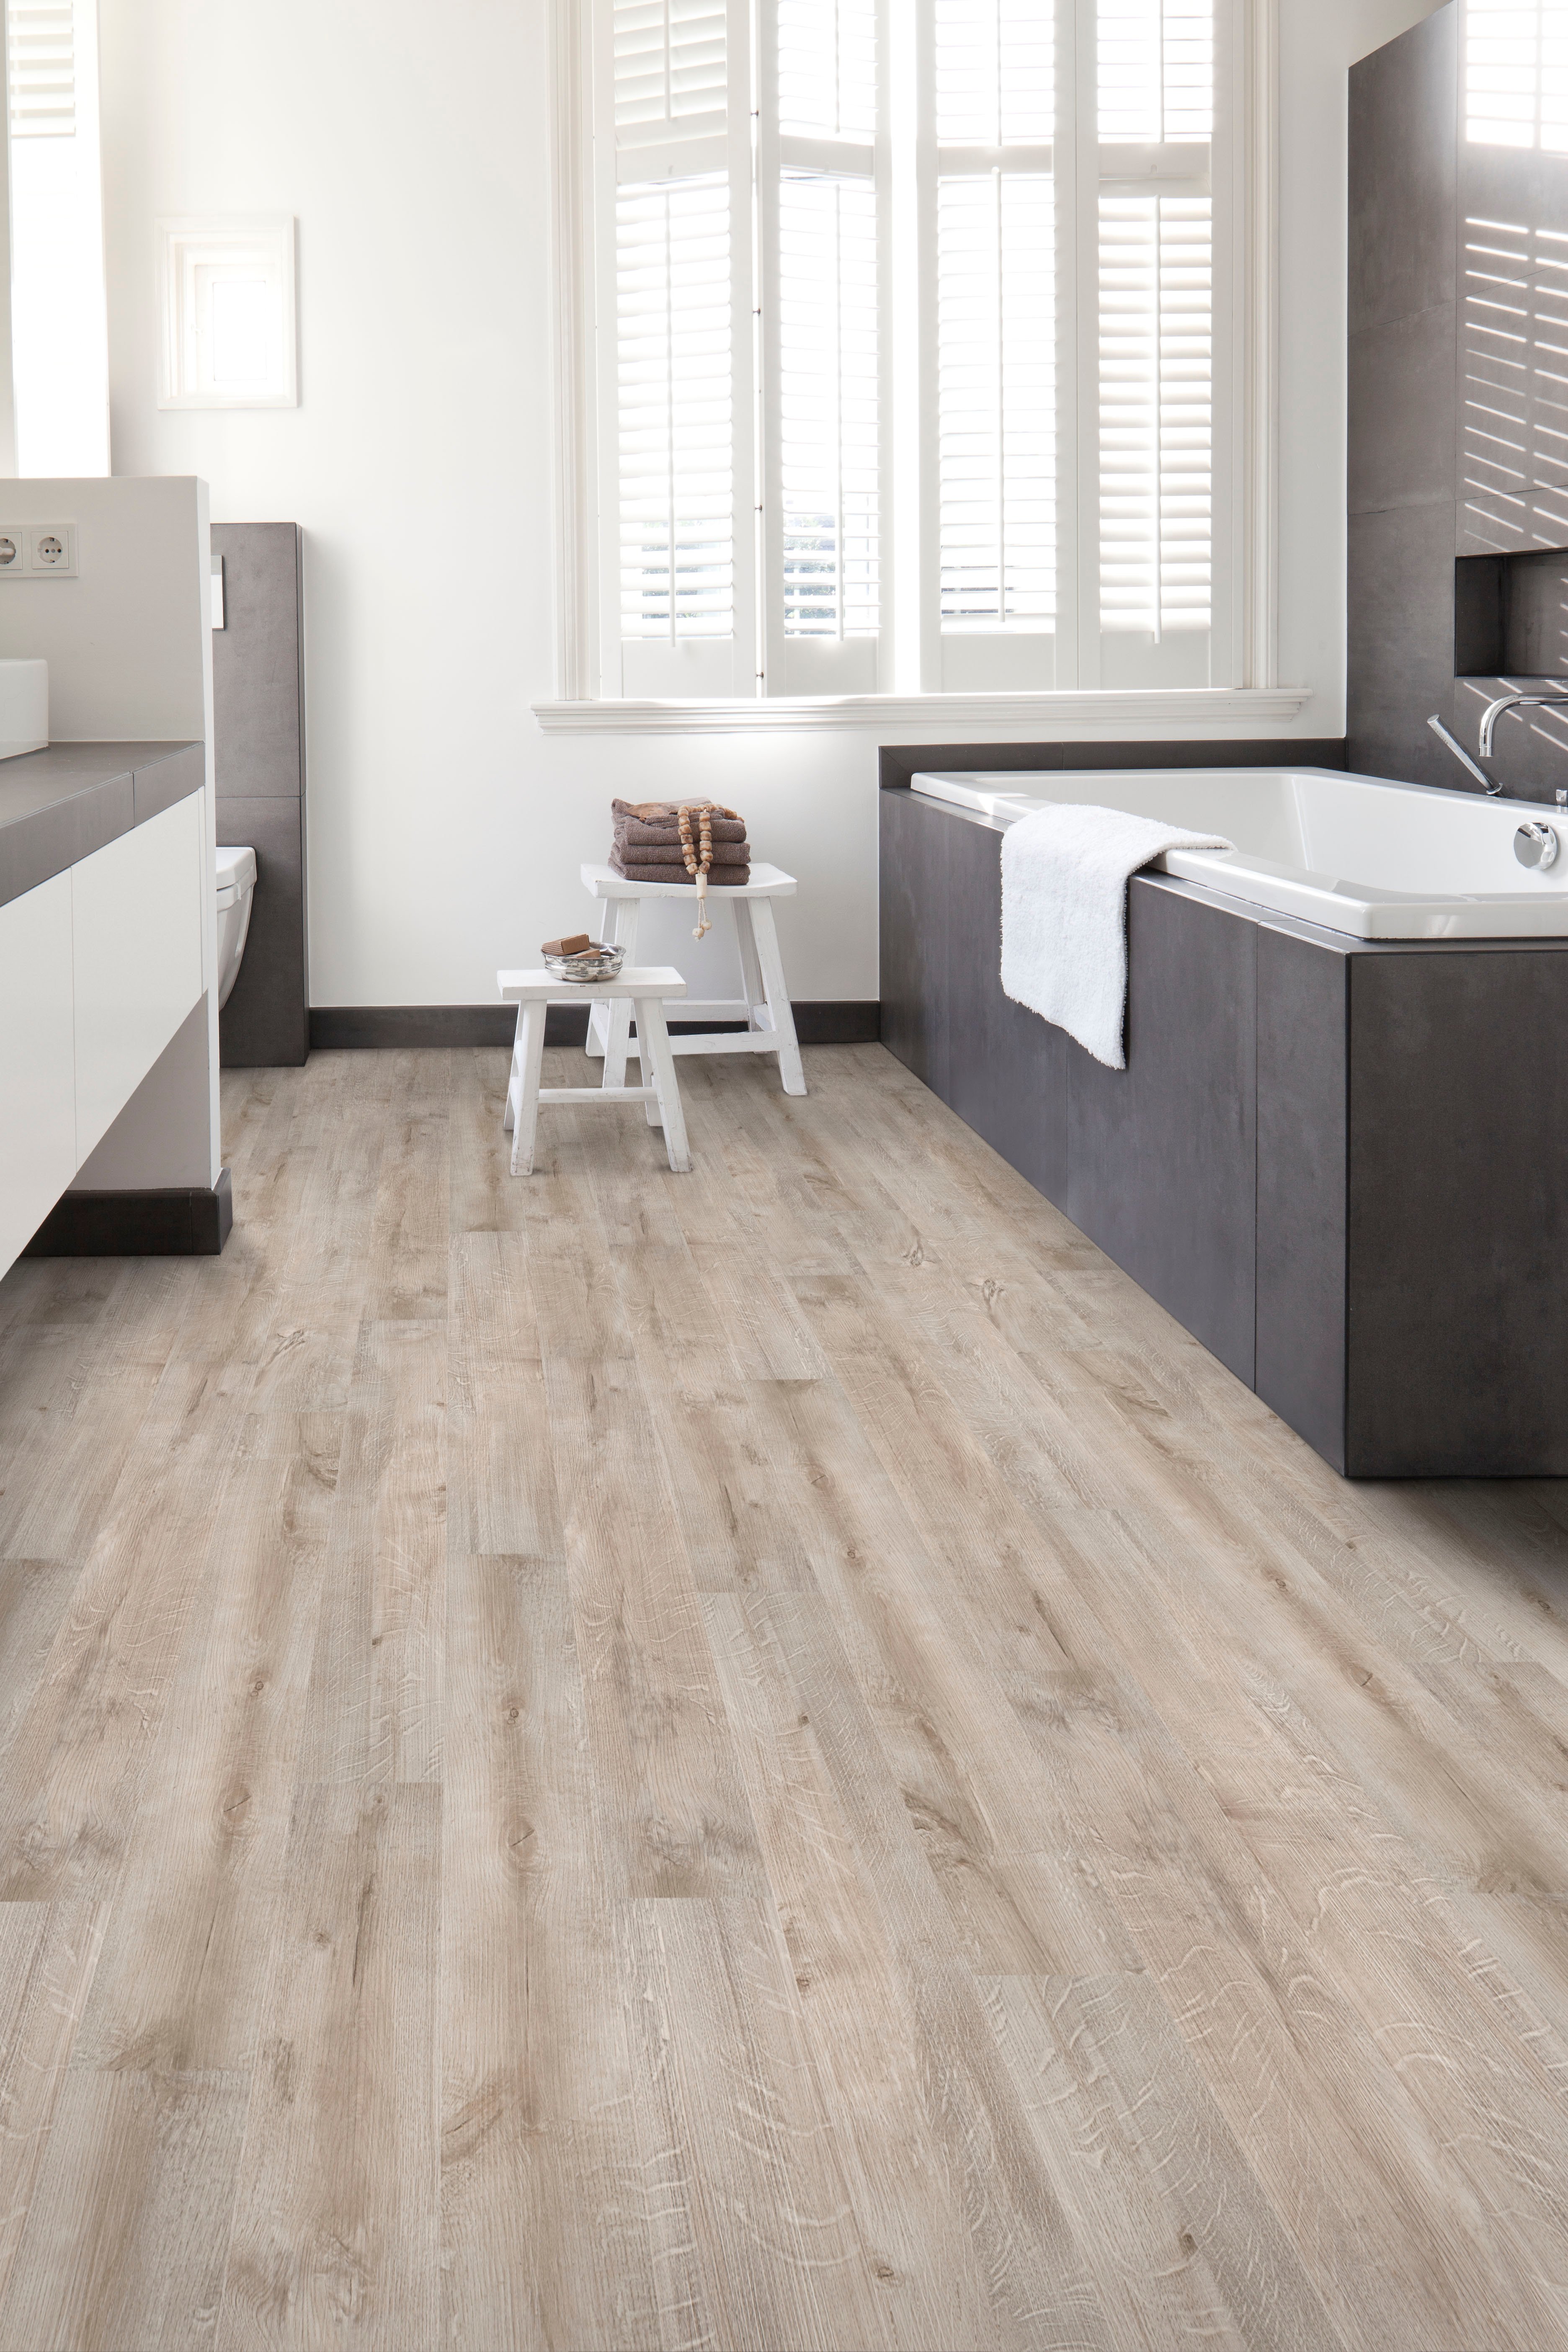 The Buyer's guide to bathroom flooring